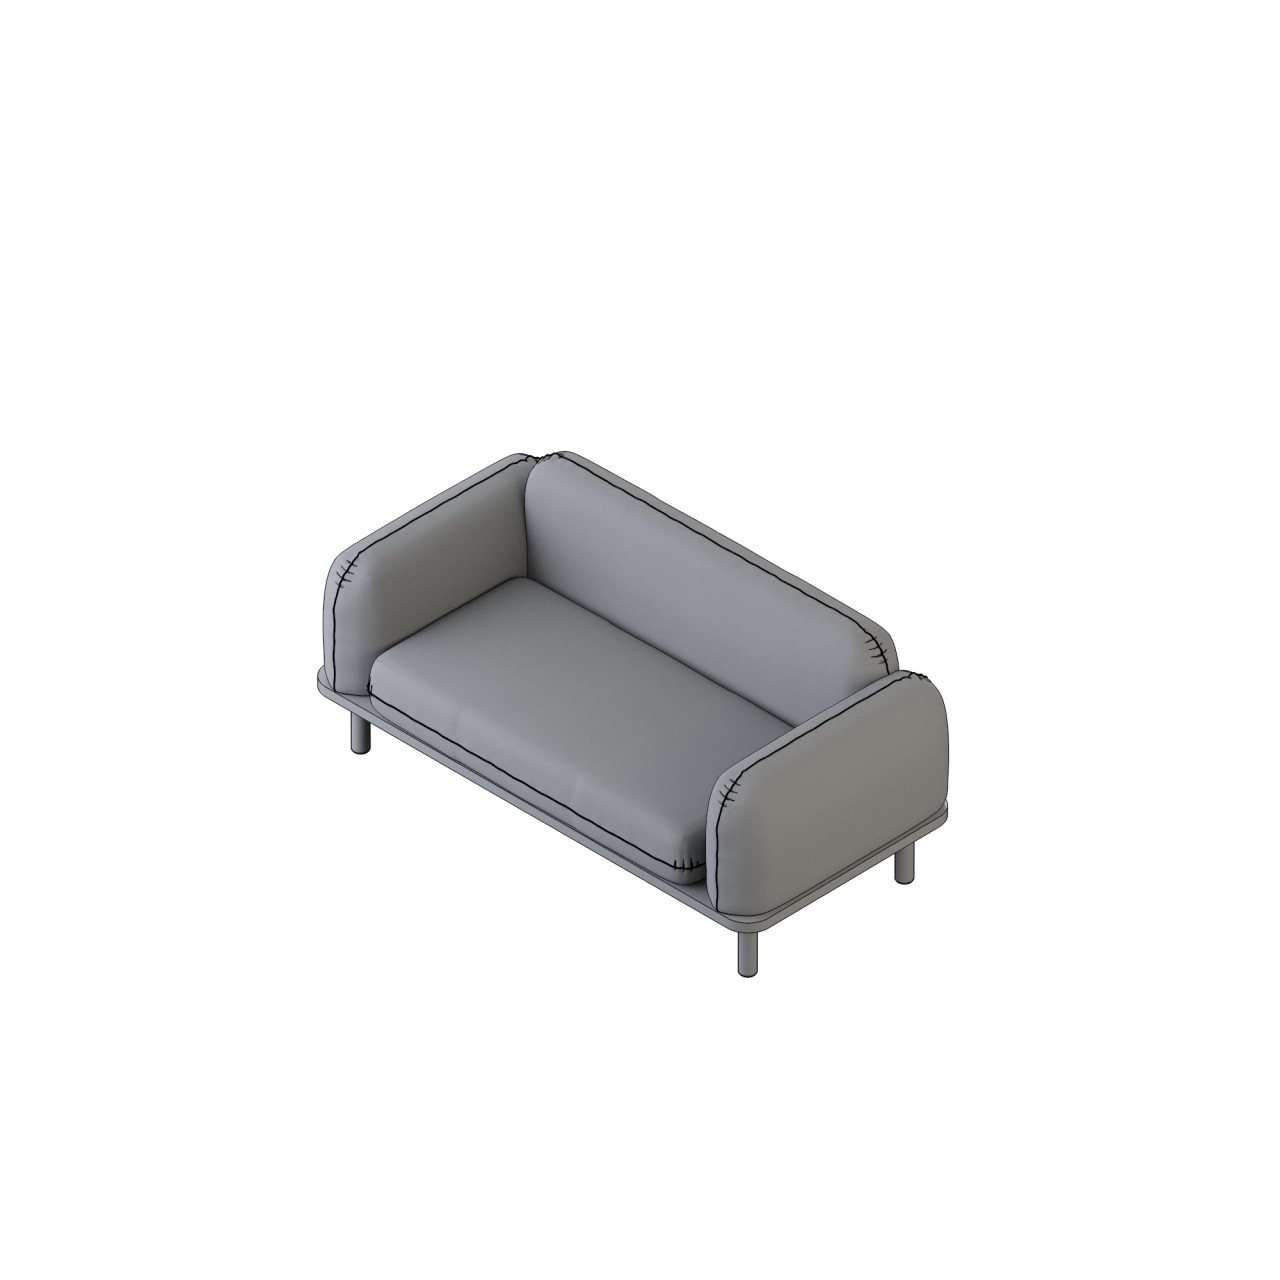 Soft - 24002
two seat with arms
COM 8.5
arms 2.75, back 2,
base 2, seat 2.75
 